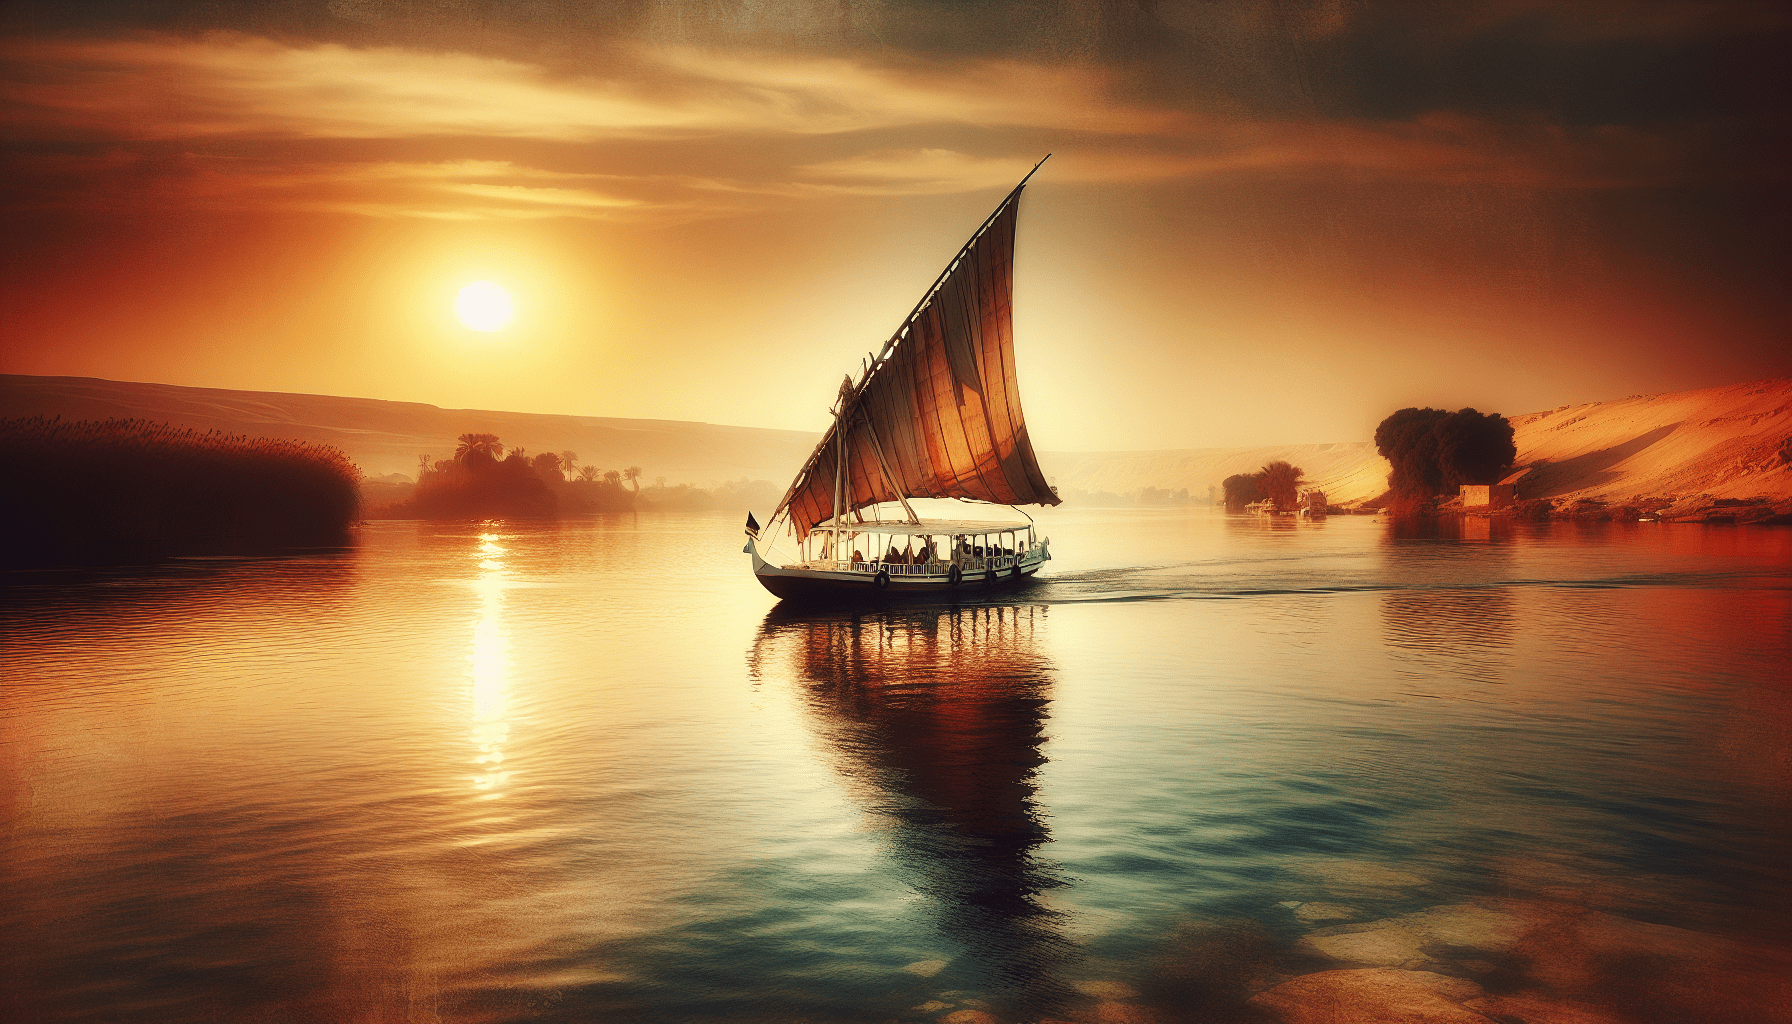 How Many Days Does It Take You To Complete The Nile Journey?